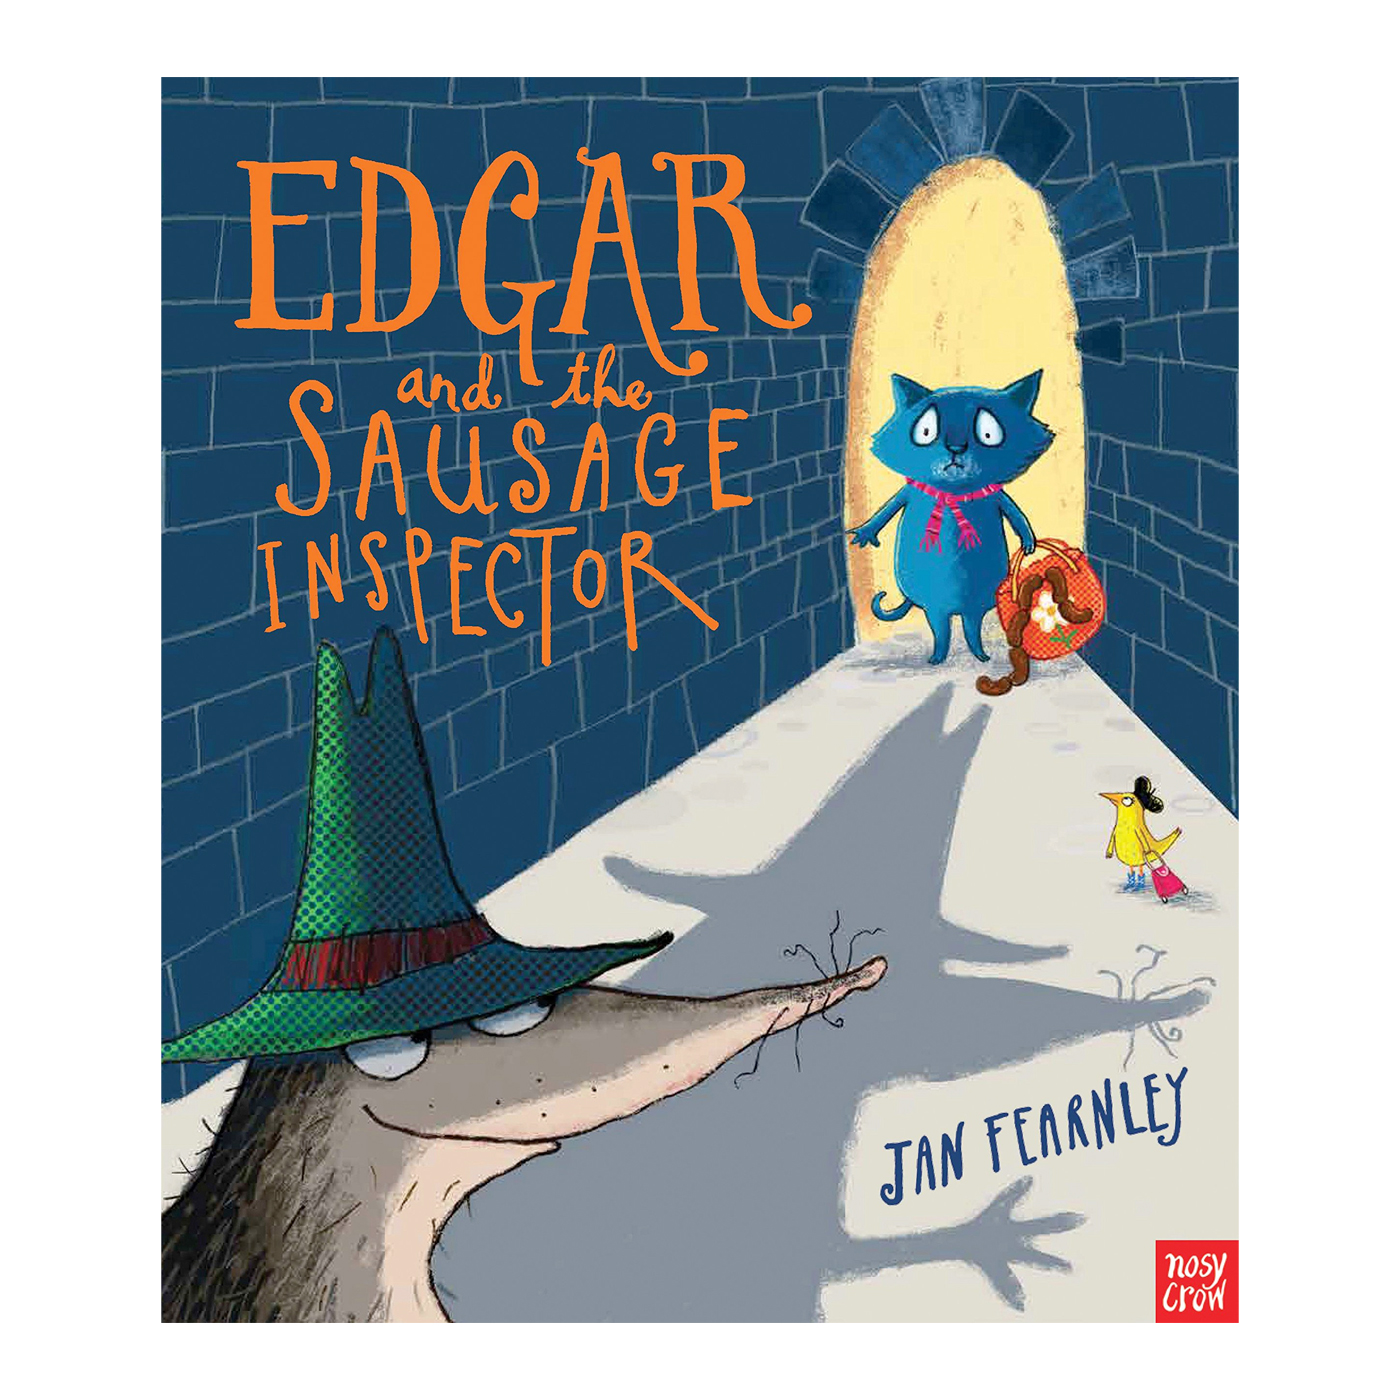  Edgar and the Sausage Inspector